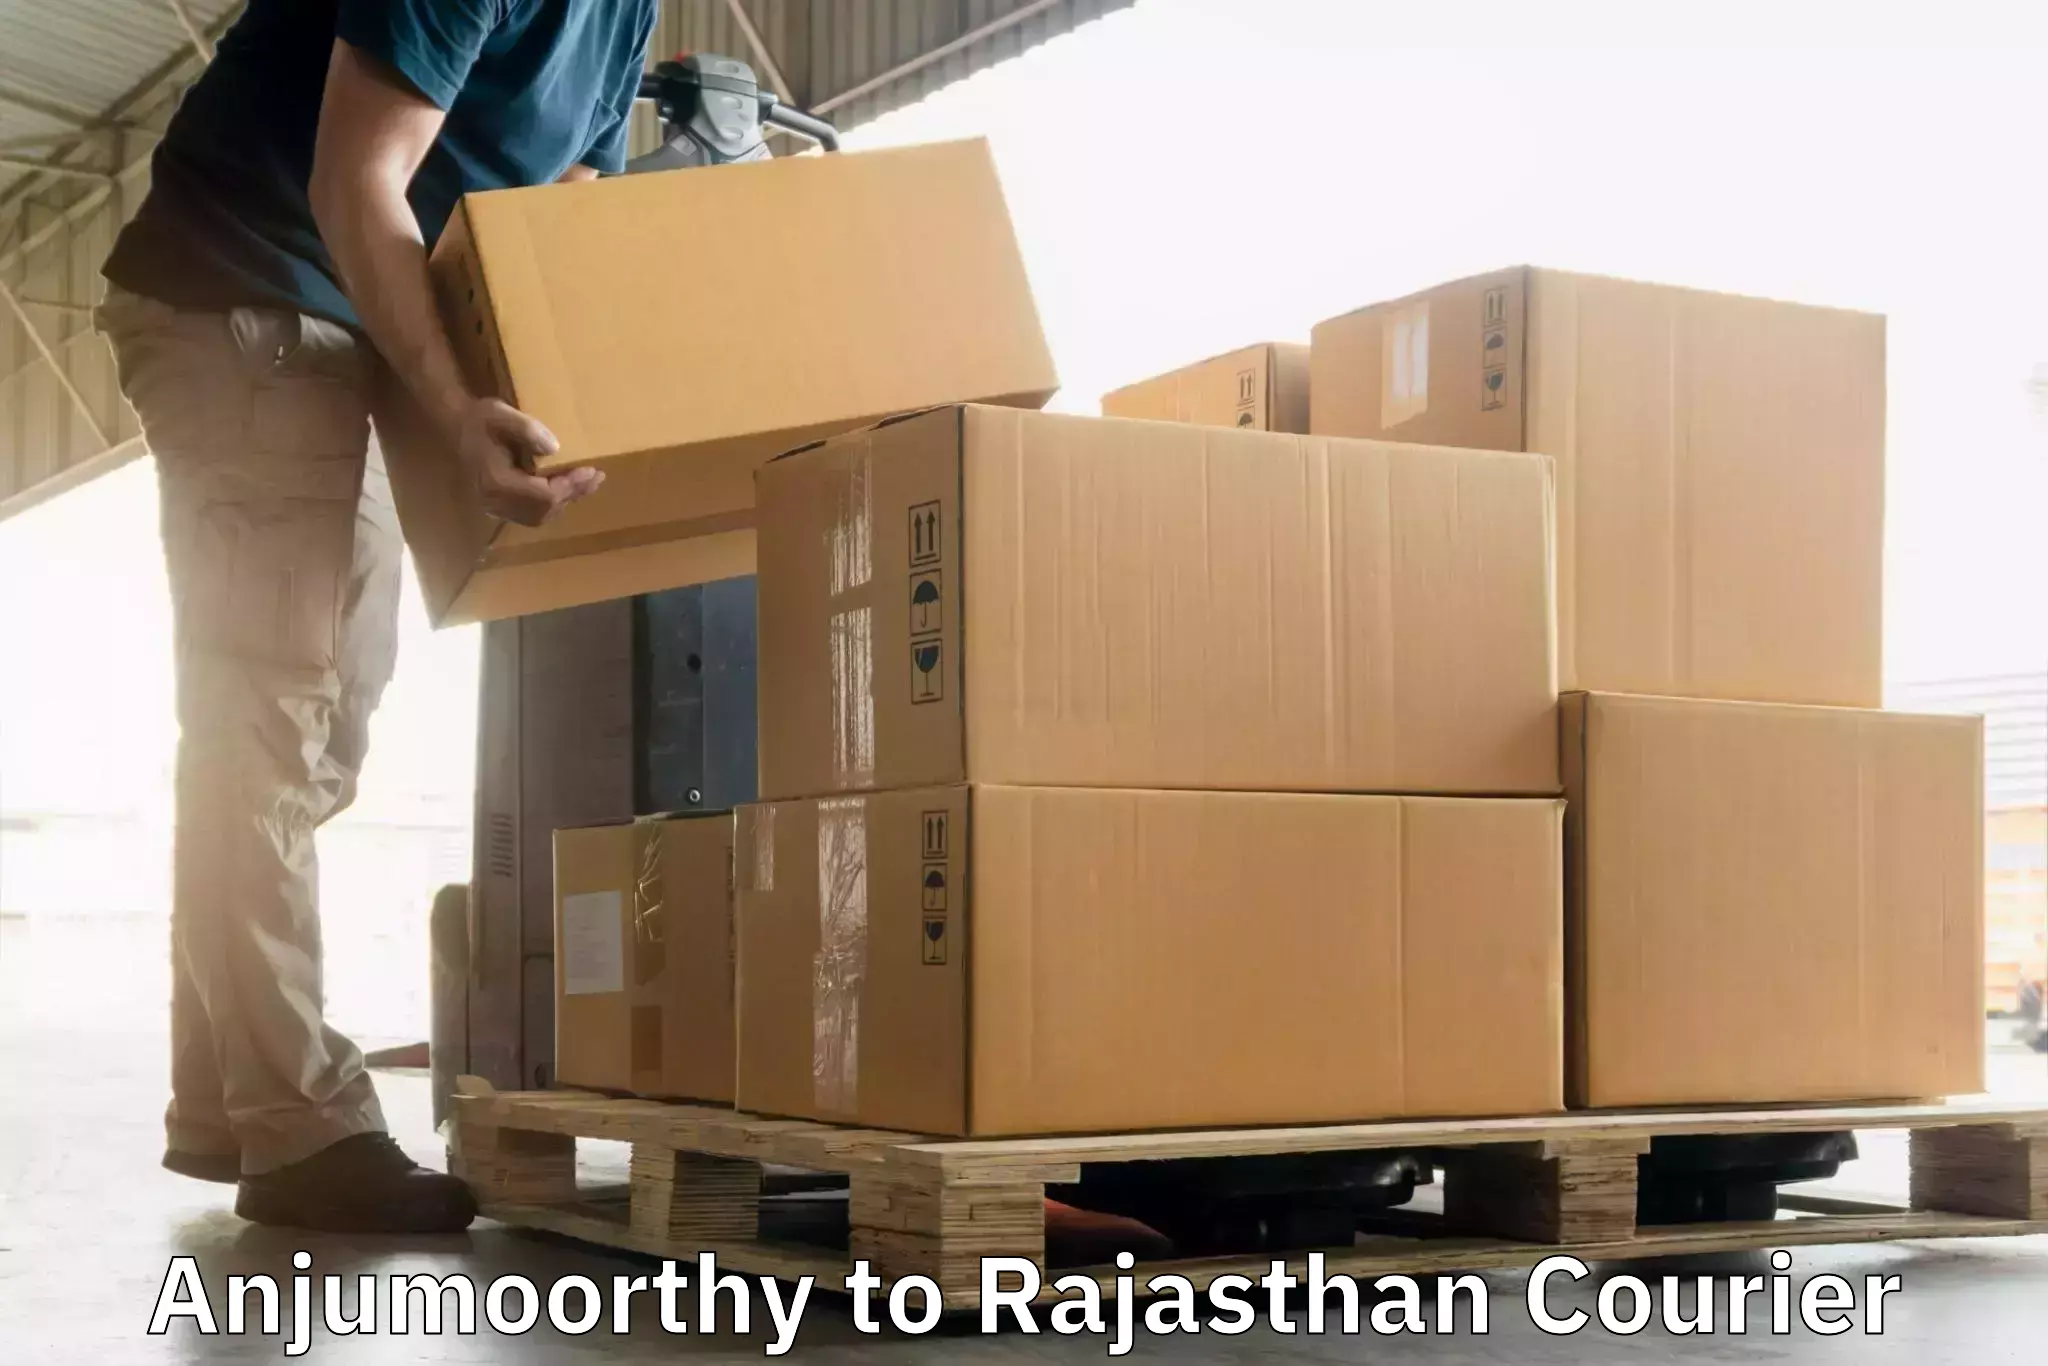 Easy access courier services Anjumoorthy to Yeswanthapur